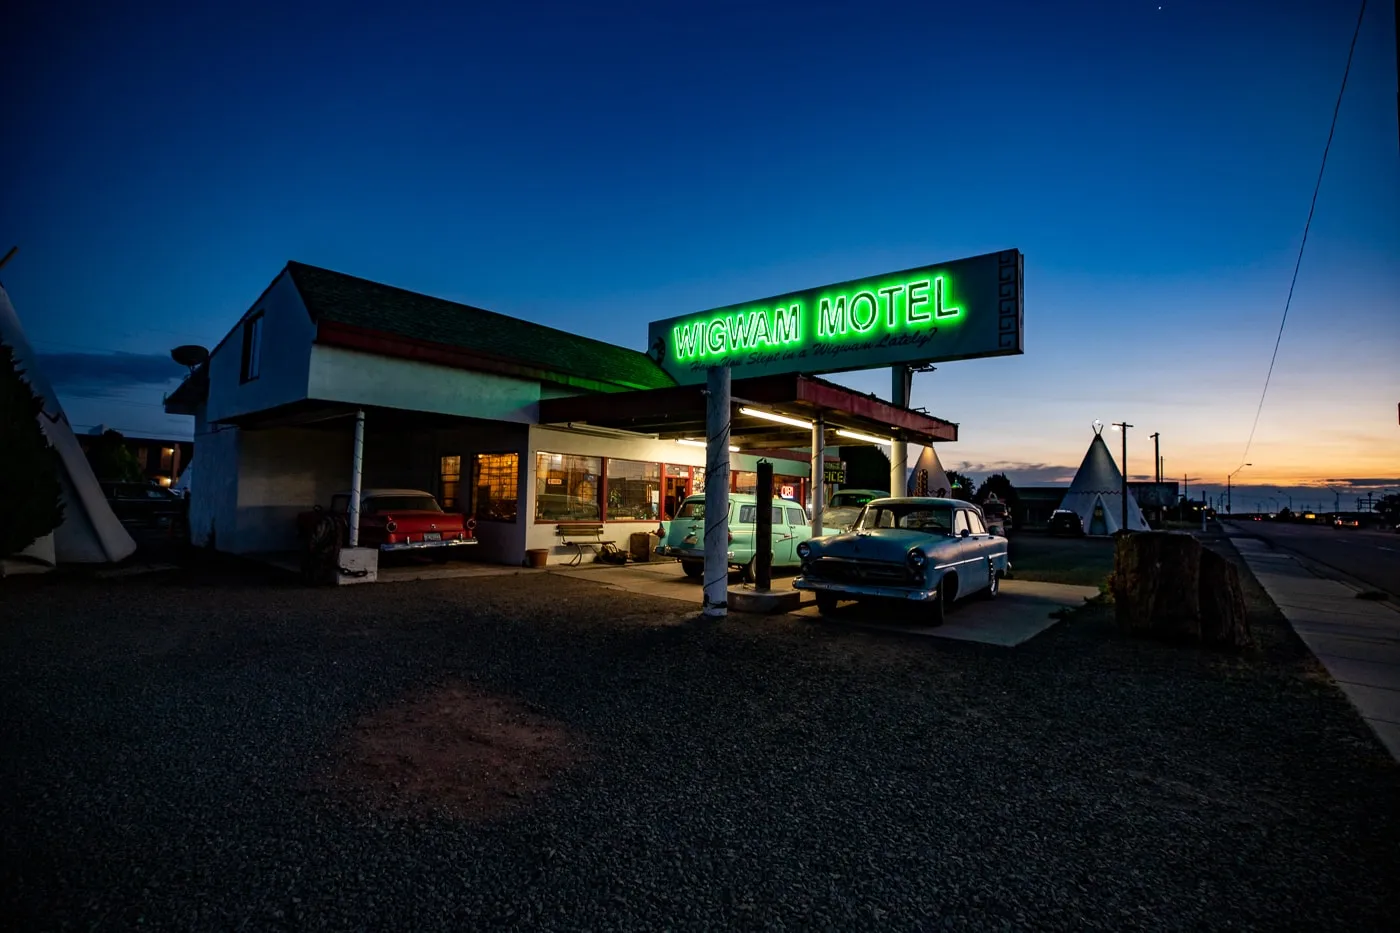 Reception building with lit up neon sign at Wigwam Motel in Holbrook, Arizona - Route 66 Motel - Wigwam Village Motel #6